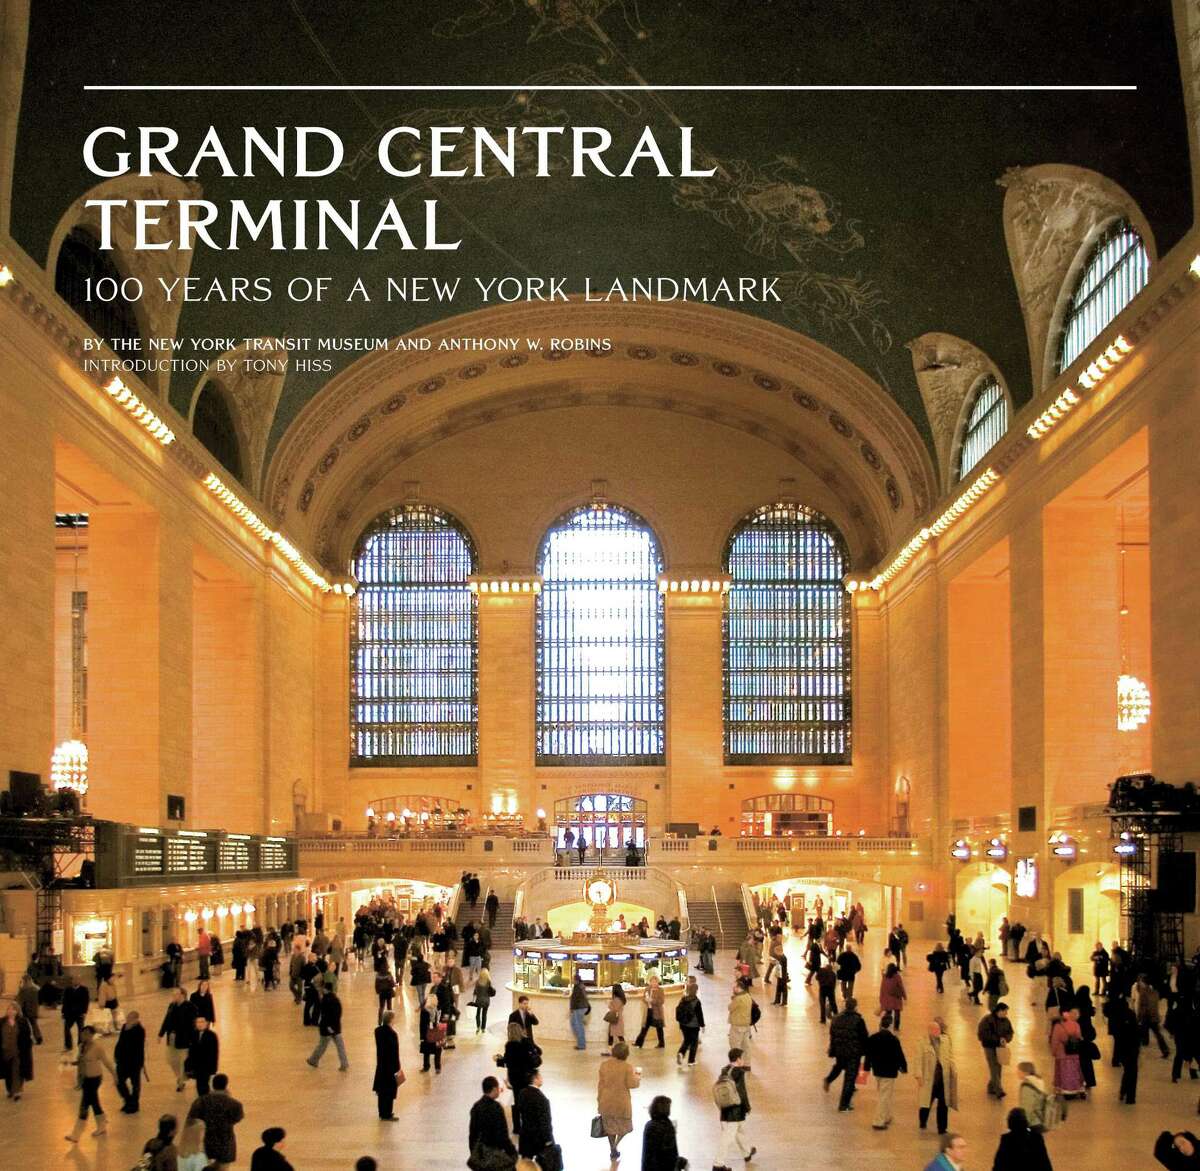 New York City historian Anthony W. Robins has written the text for a lavish coffee table book marking the 100th anniversary of Grand Central Terminal.